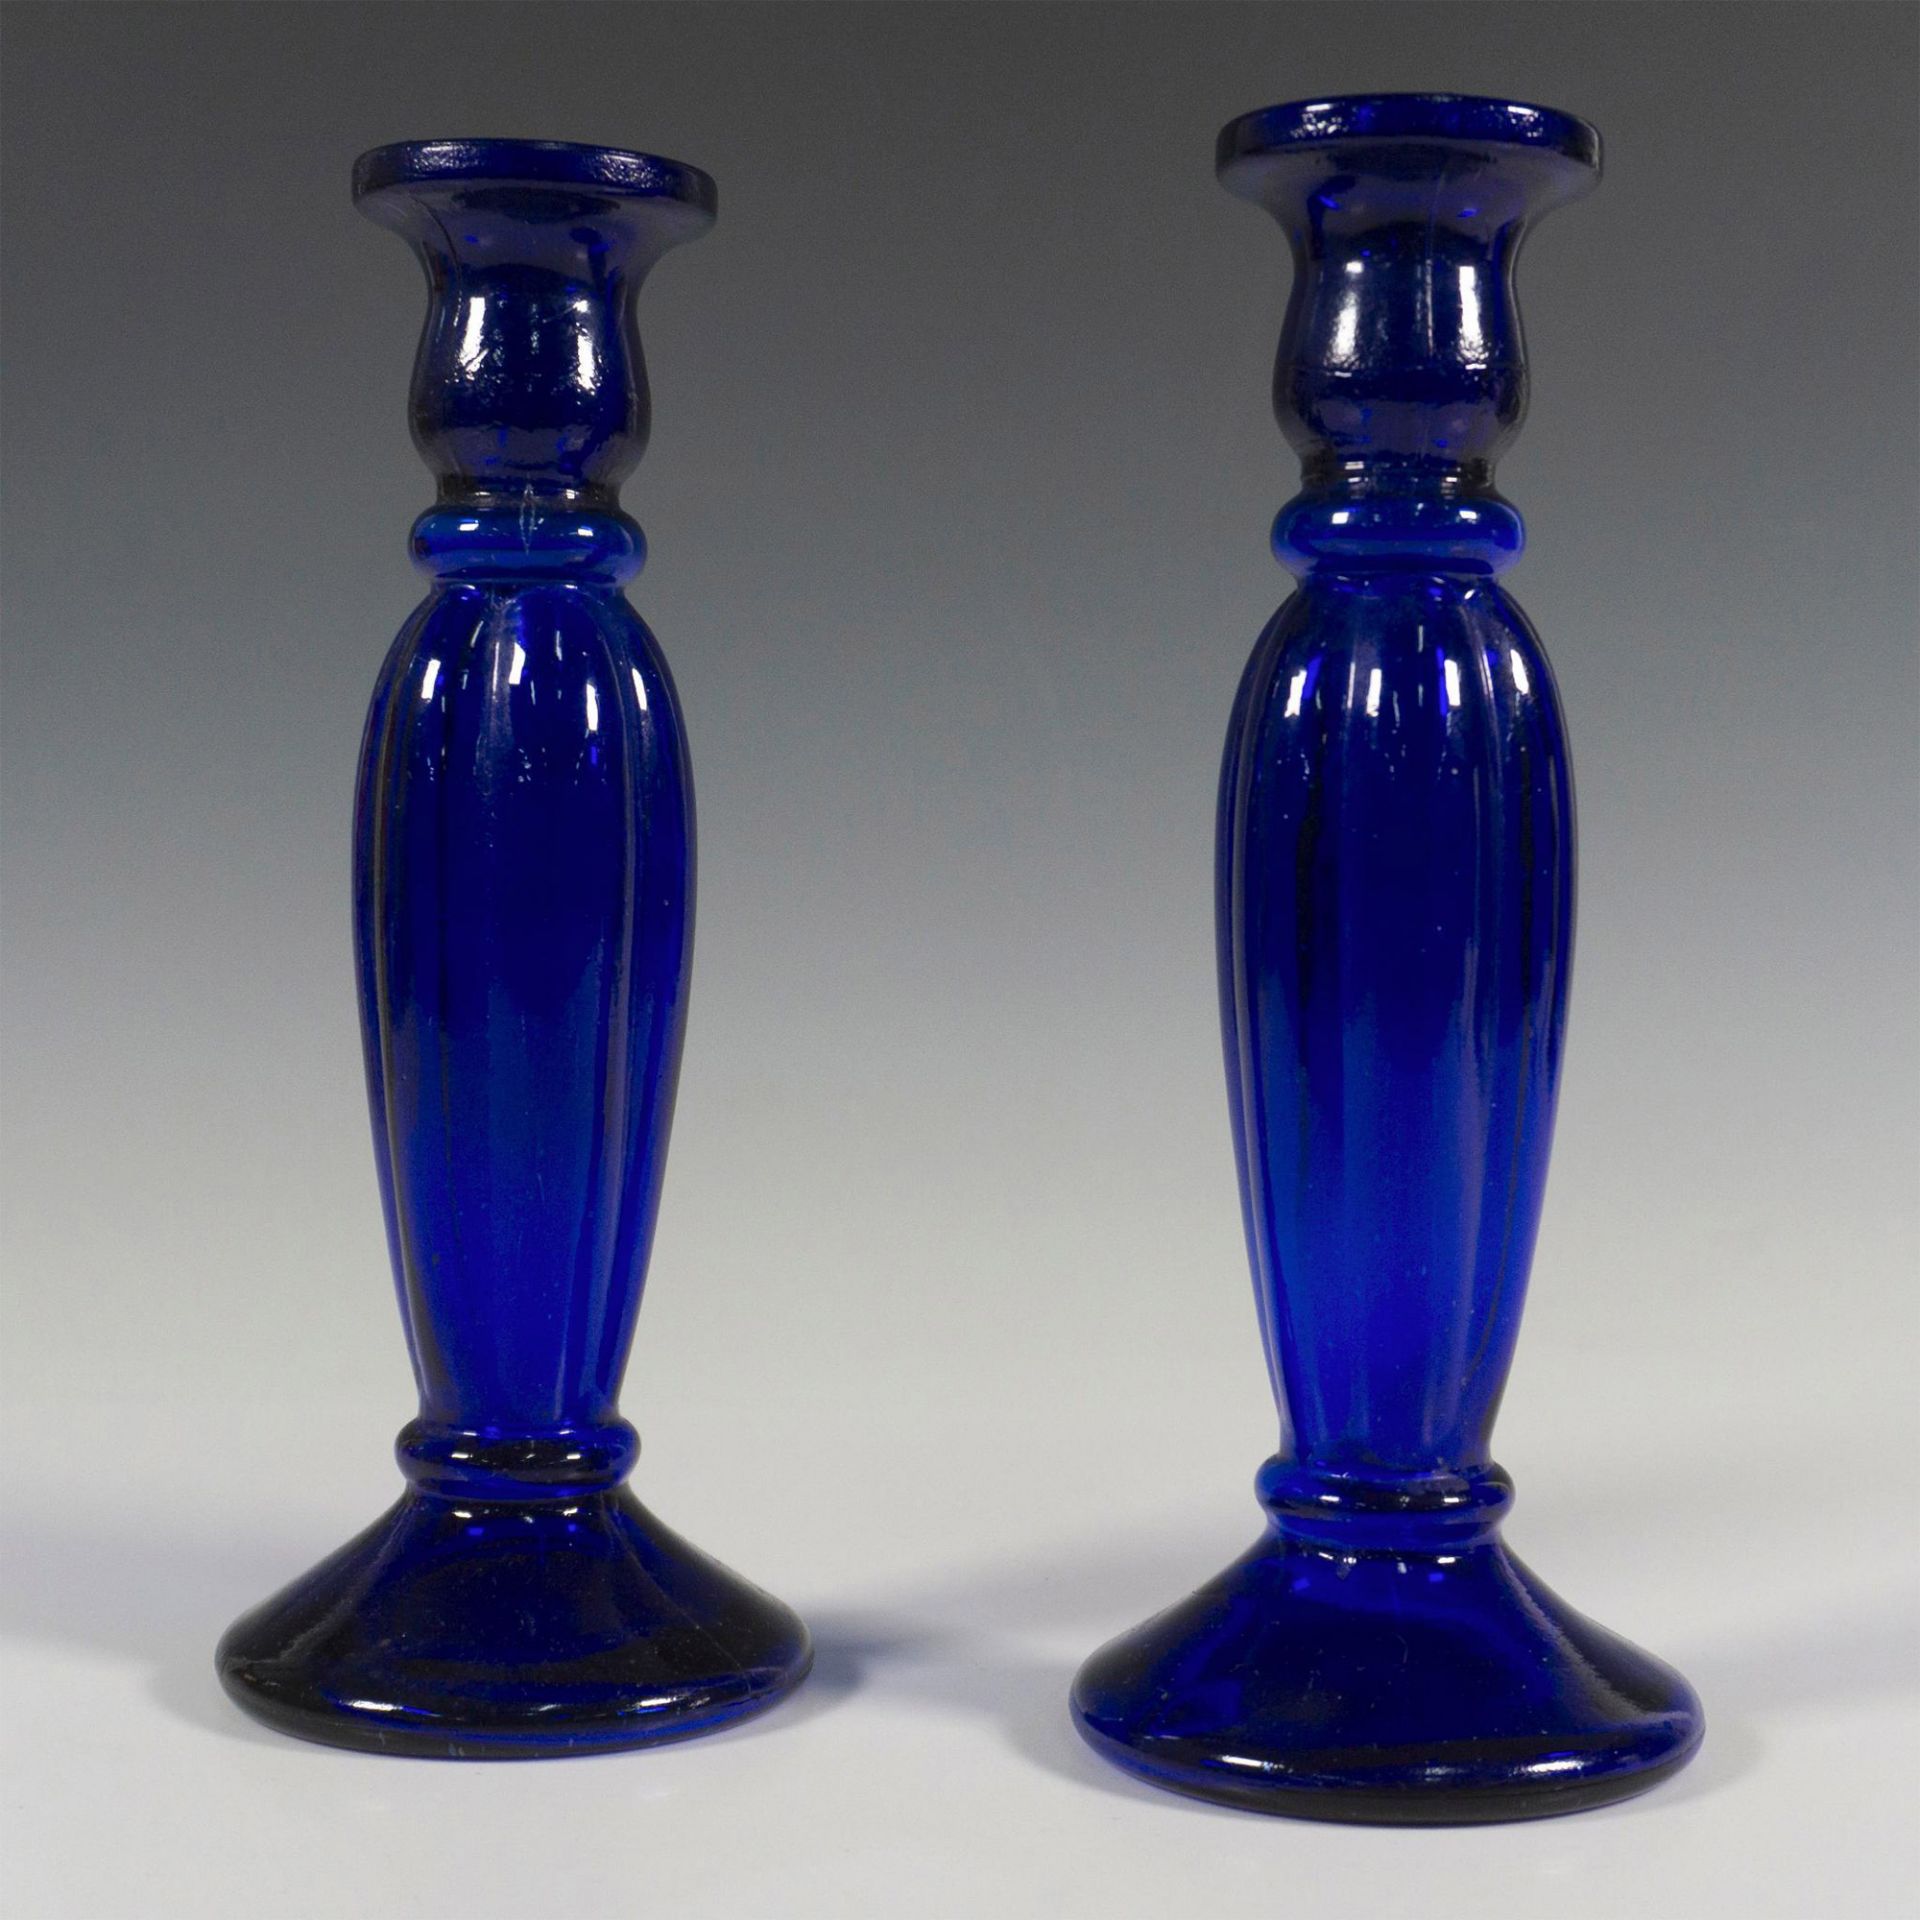 Pair of Vintage Art Glass Blue Candle Holders - Image 2 of 5